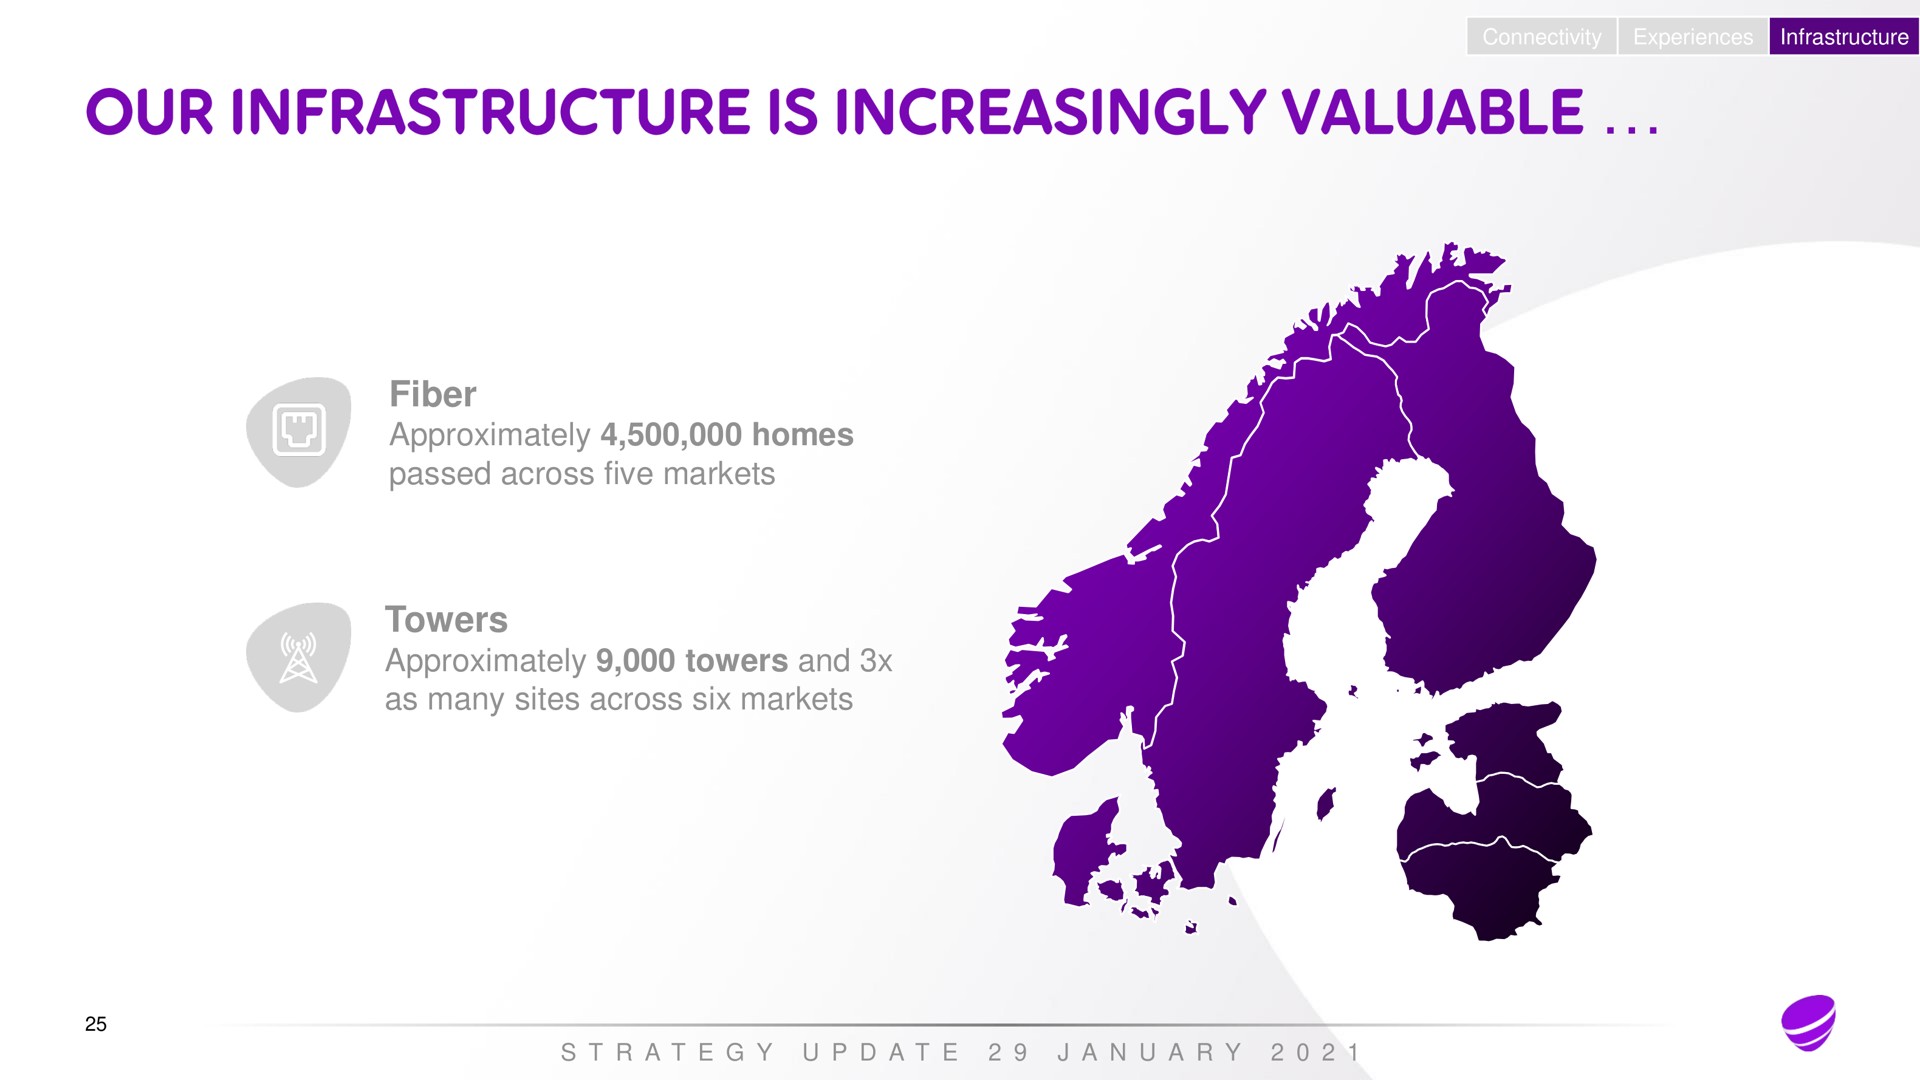 connectivity experiences infrastructure fiber approximately homes passed across five markets towers approximately towers and as many sites across six markets a a a a | Telia Company